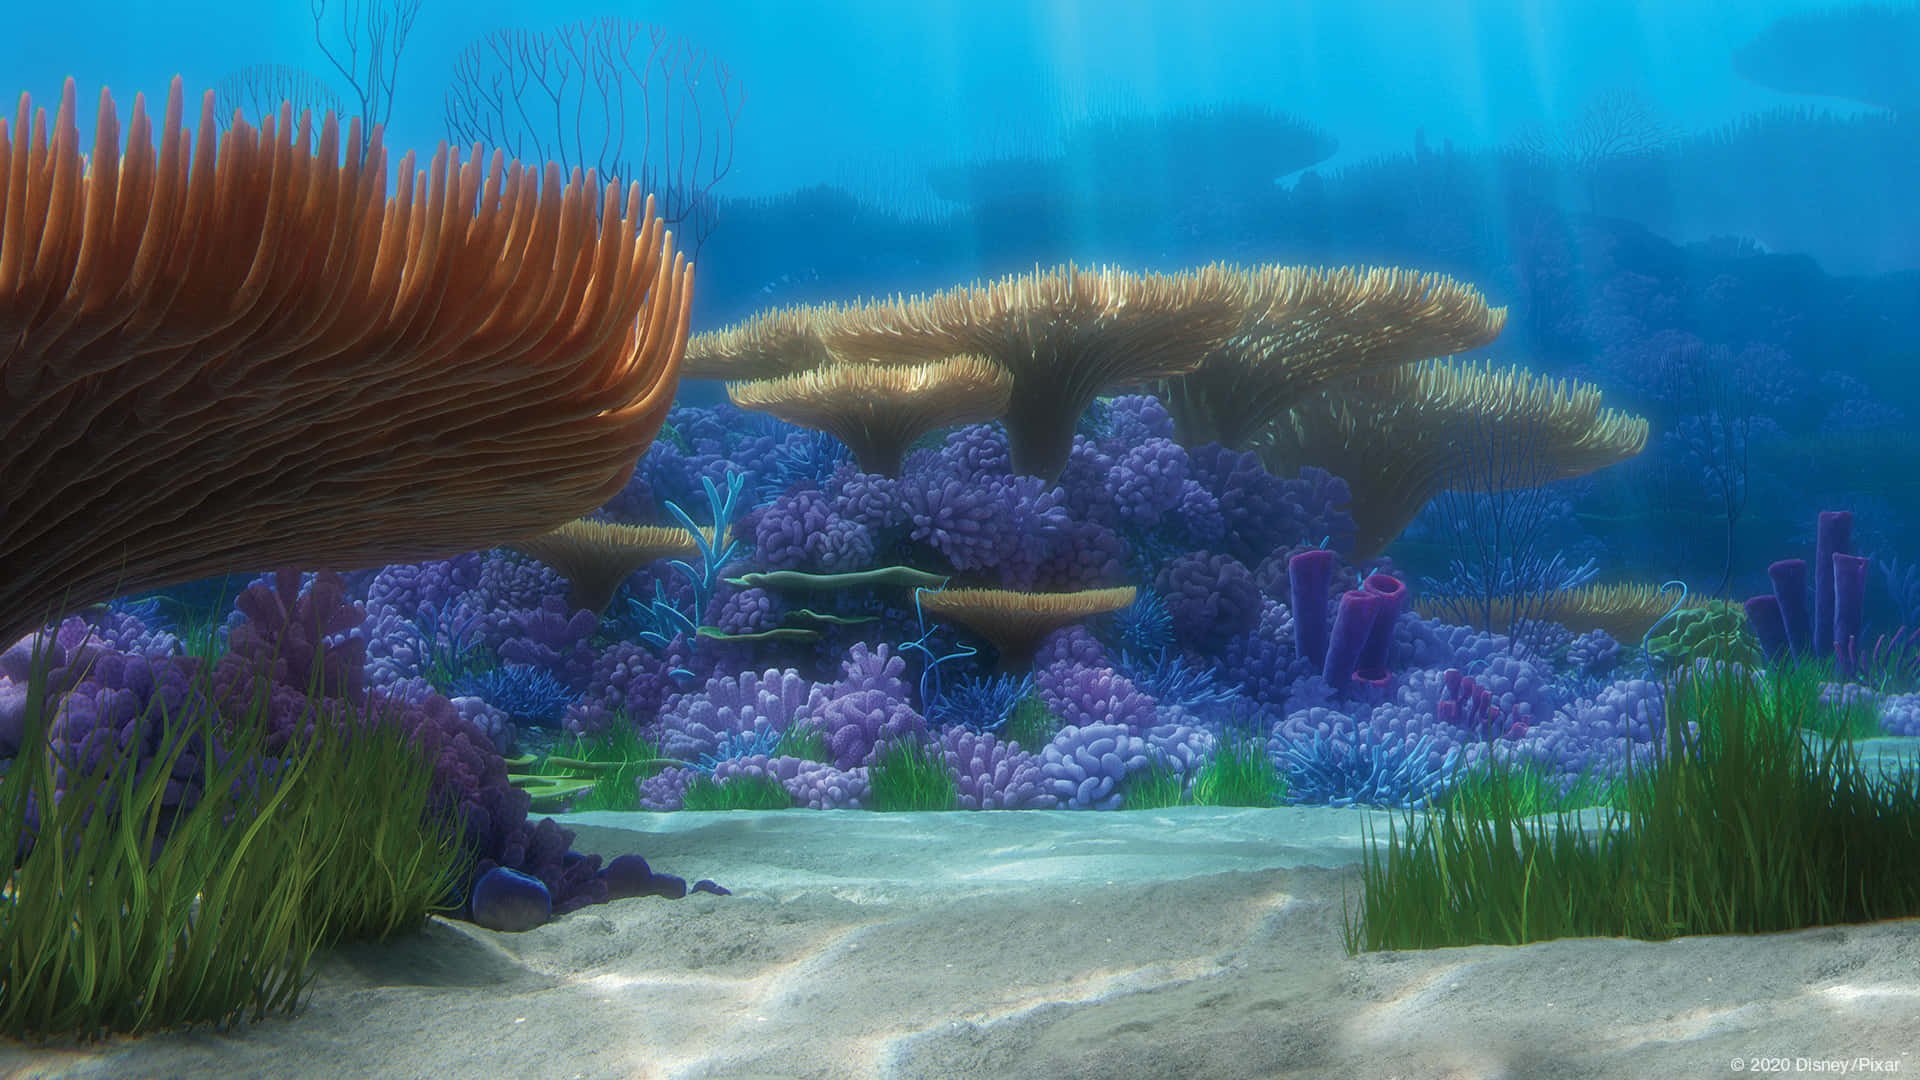 A Screenshot Of An Underwater Scene With Corals And Plants